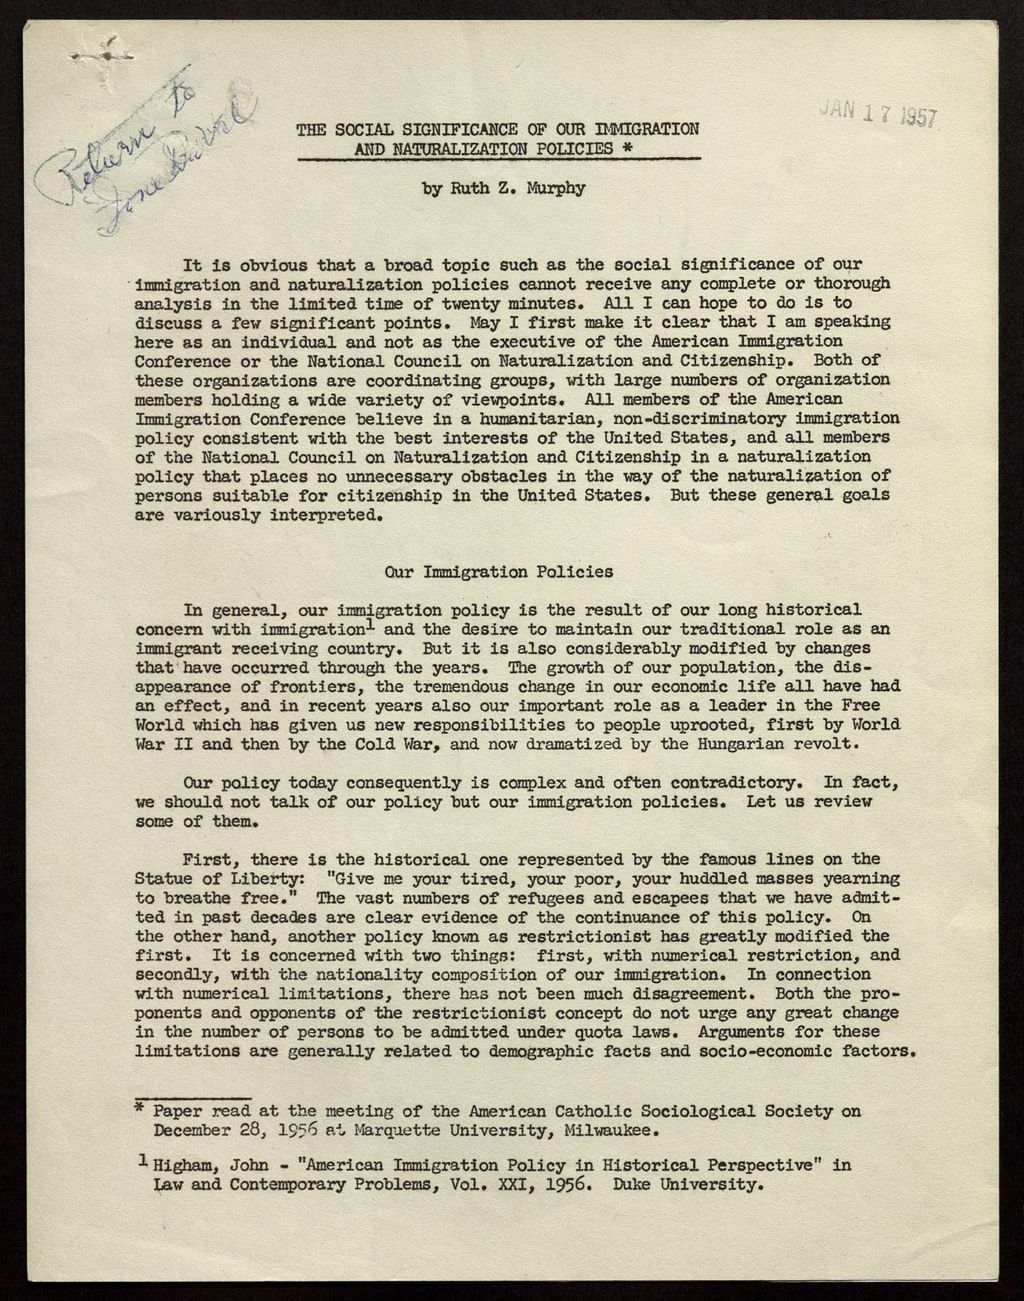 Miniature of "The Social Significance of Our Immigration and Naturalization Policies" paper, 1957 (Folder 108)